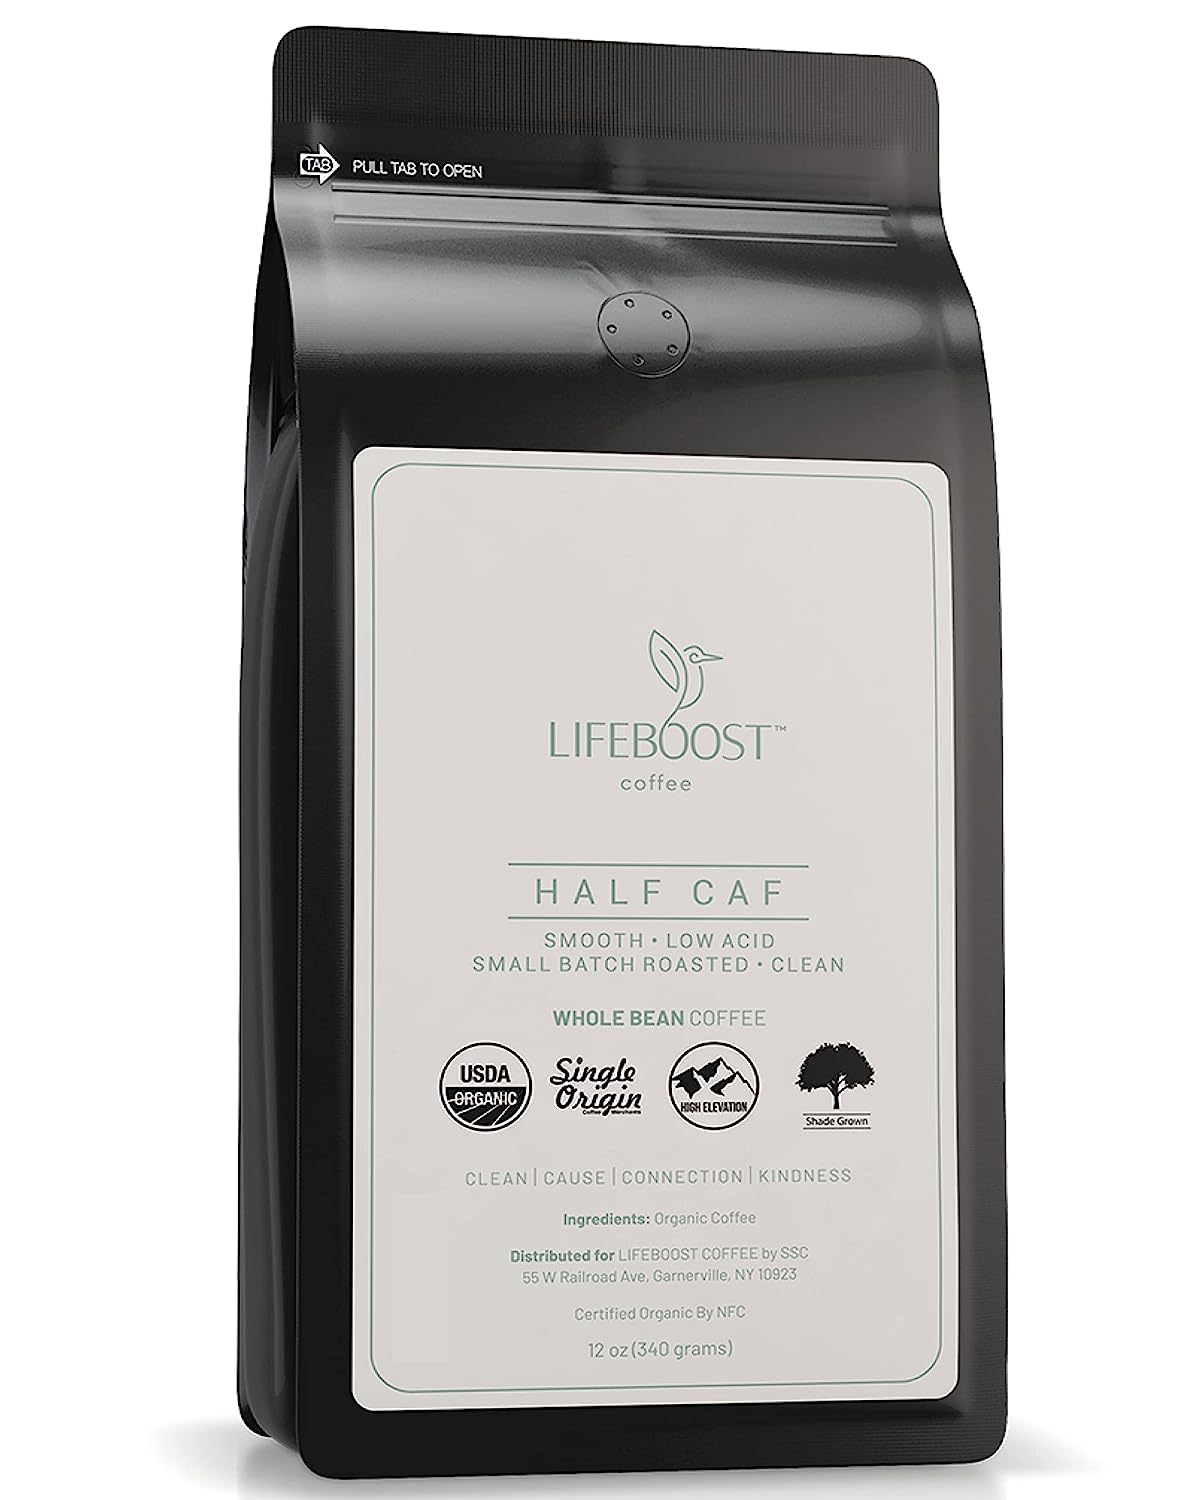 Lifeboost Coffee Whole Bean Half Caff Coffee - Low Acid Single Origin USDA Organic Coffee - Non-GMO Coffee Beans Third Party Tested For Mycotoxins & Pesticides